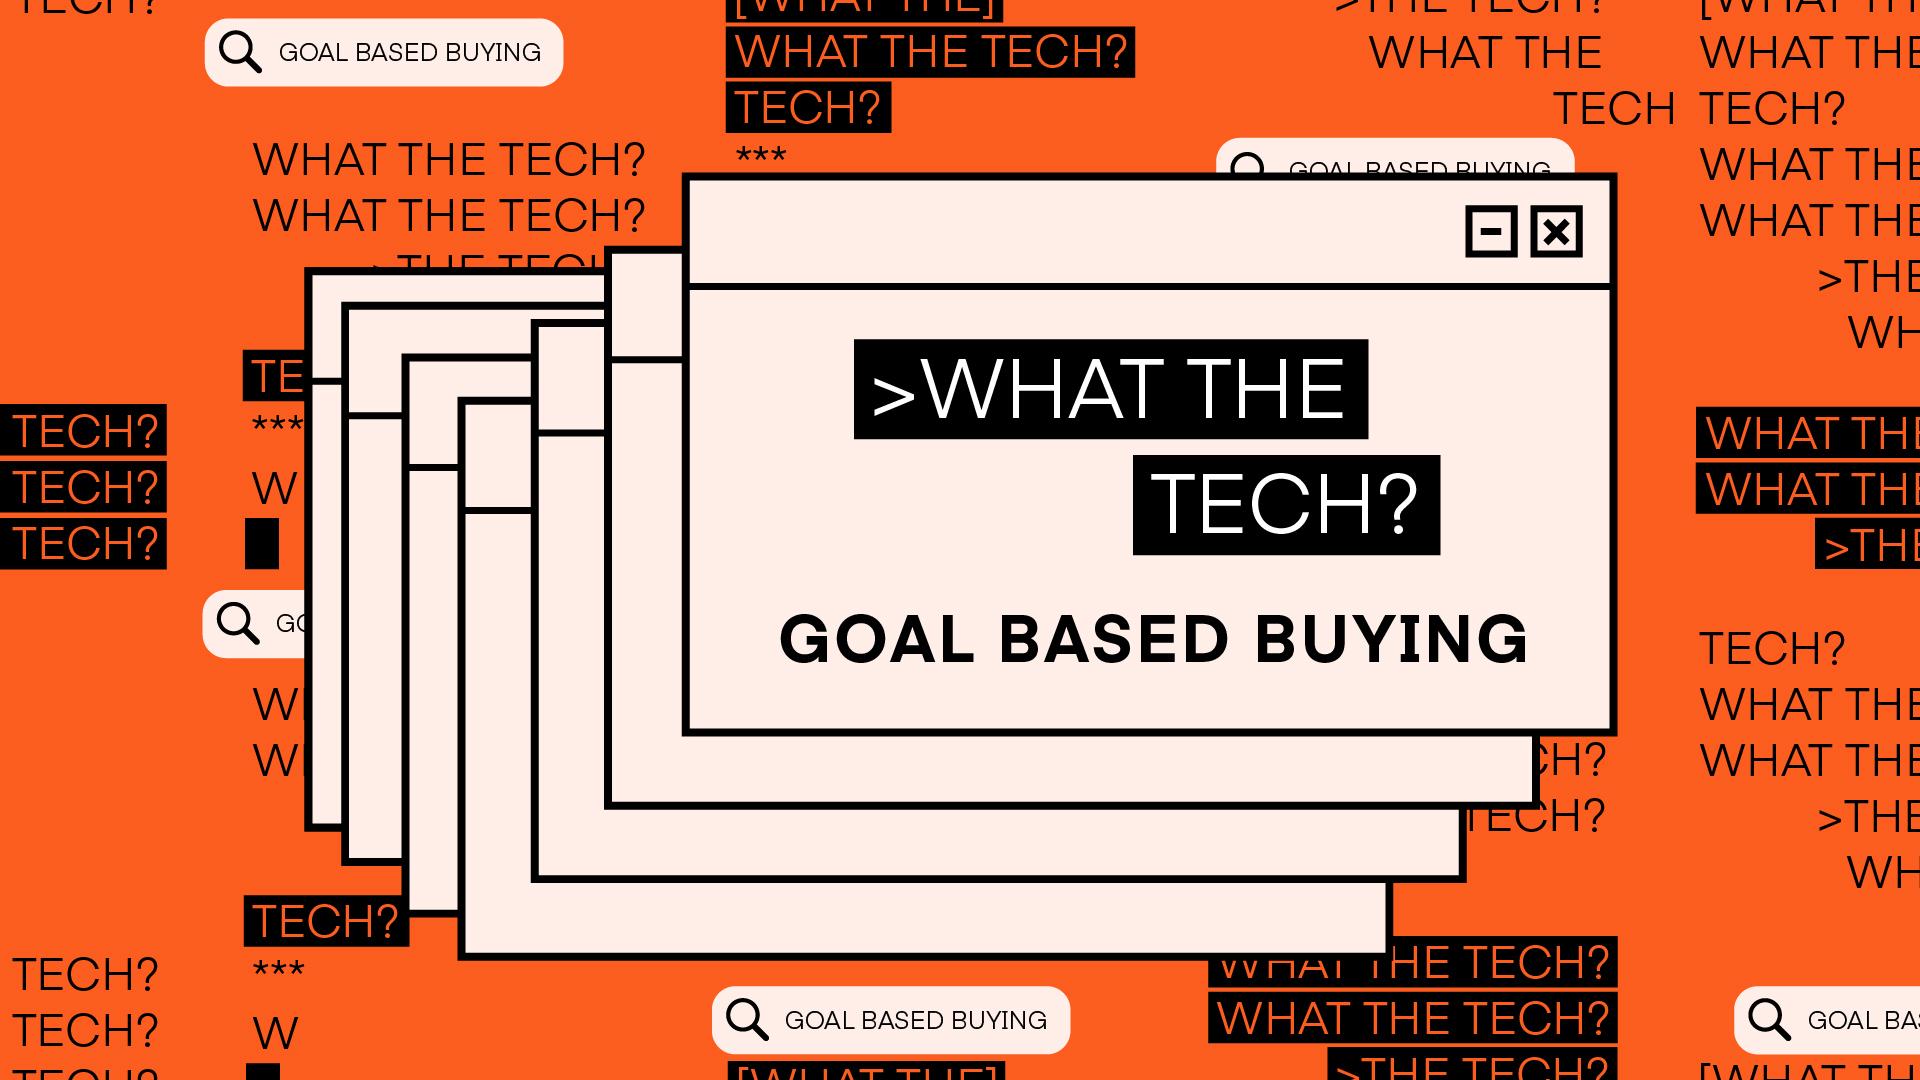 What the Tech is goal-based buying?